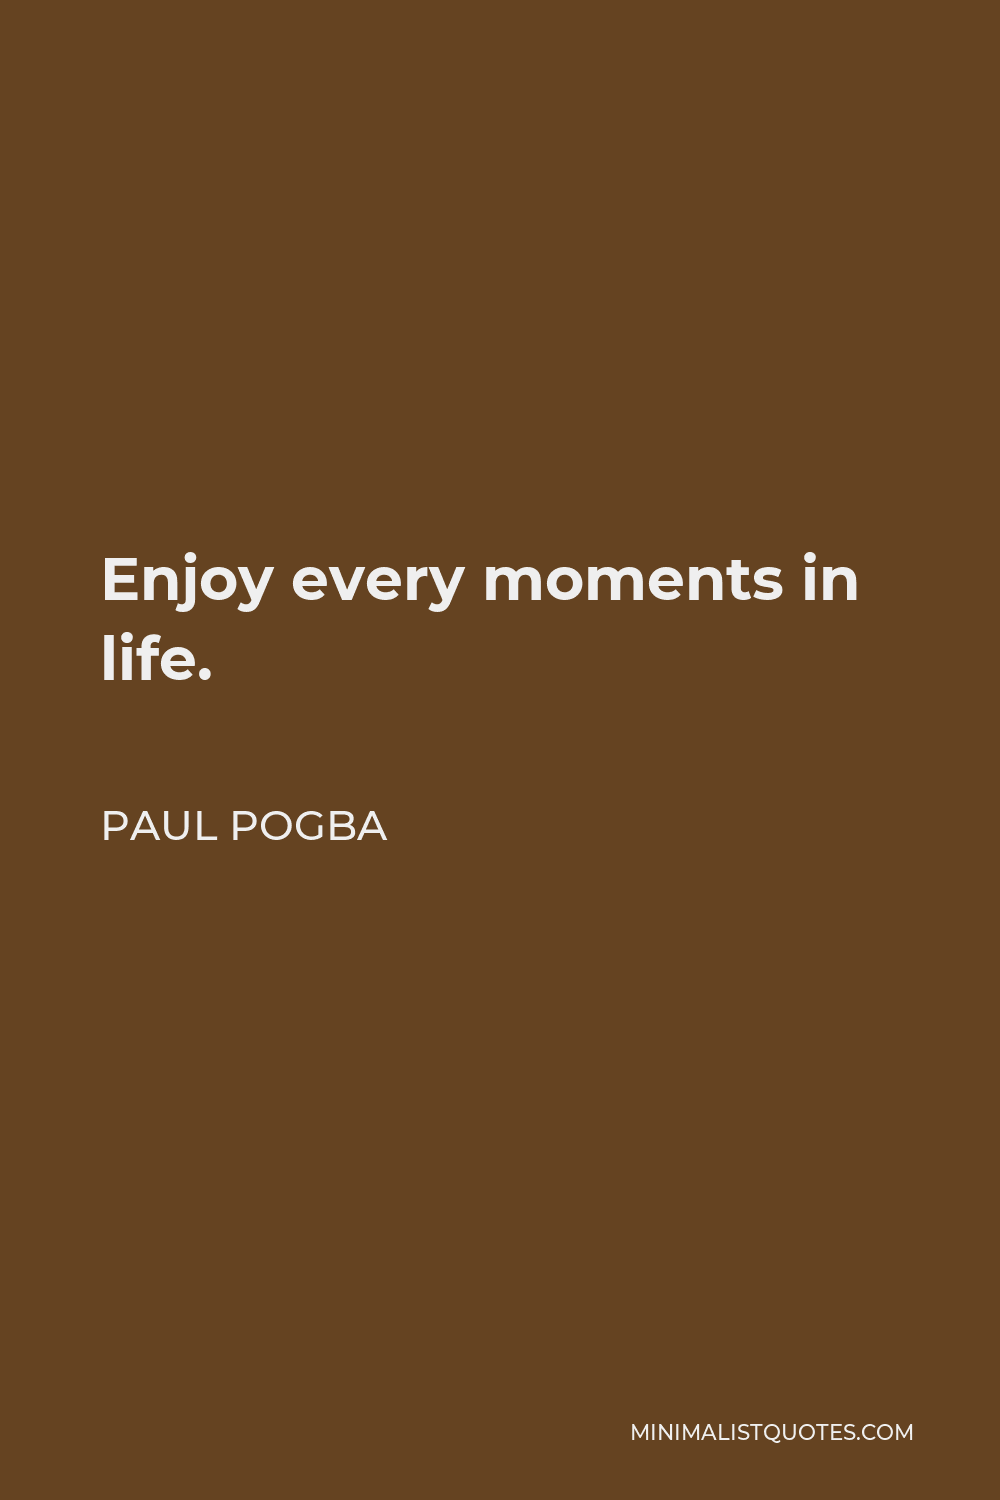 Paul Pogba Quote - Enjoy every moments in life.